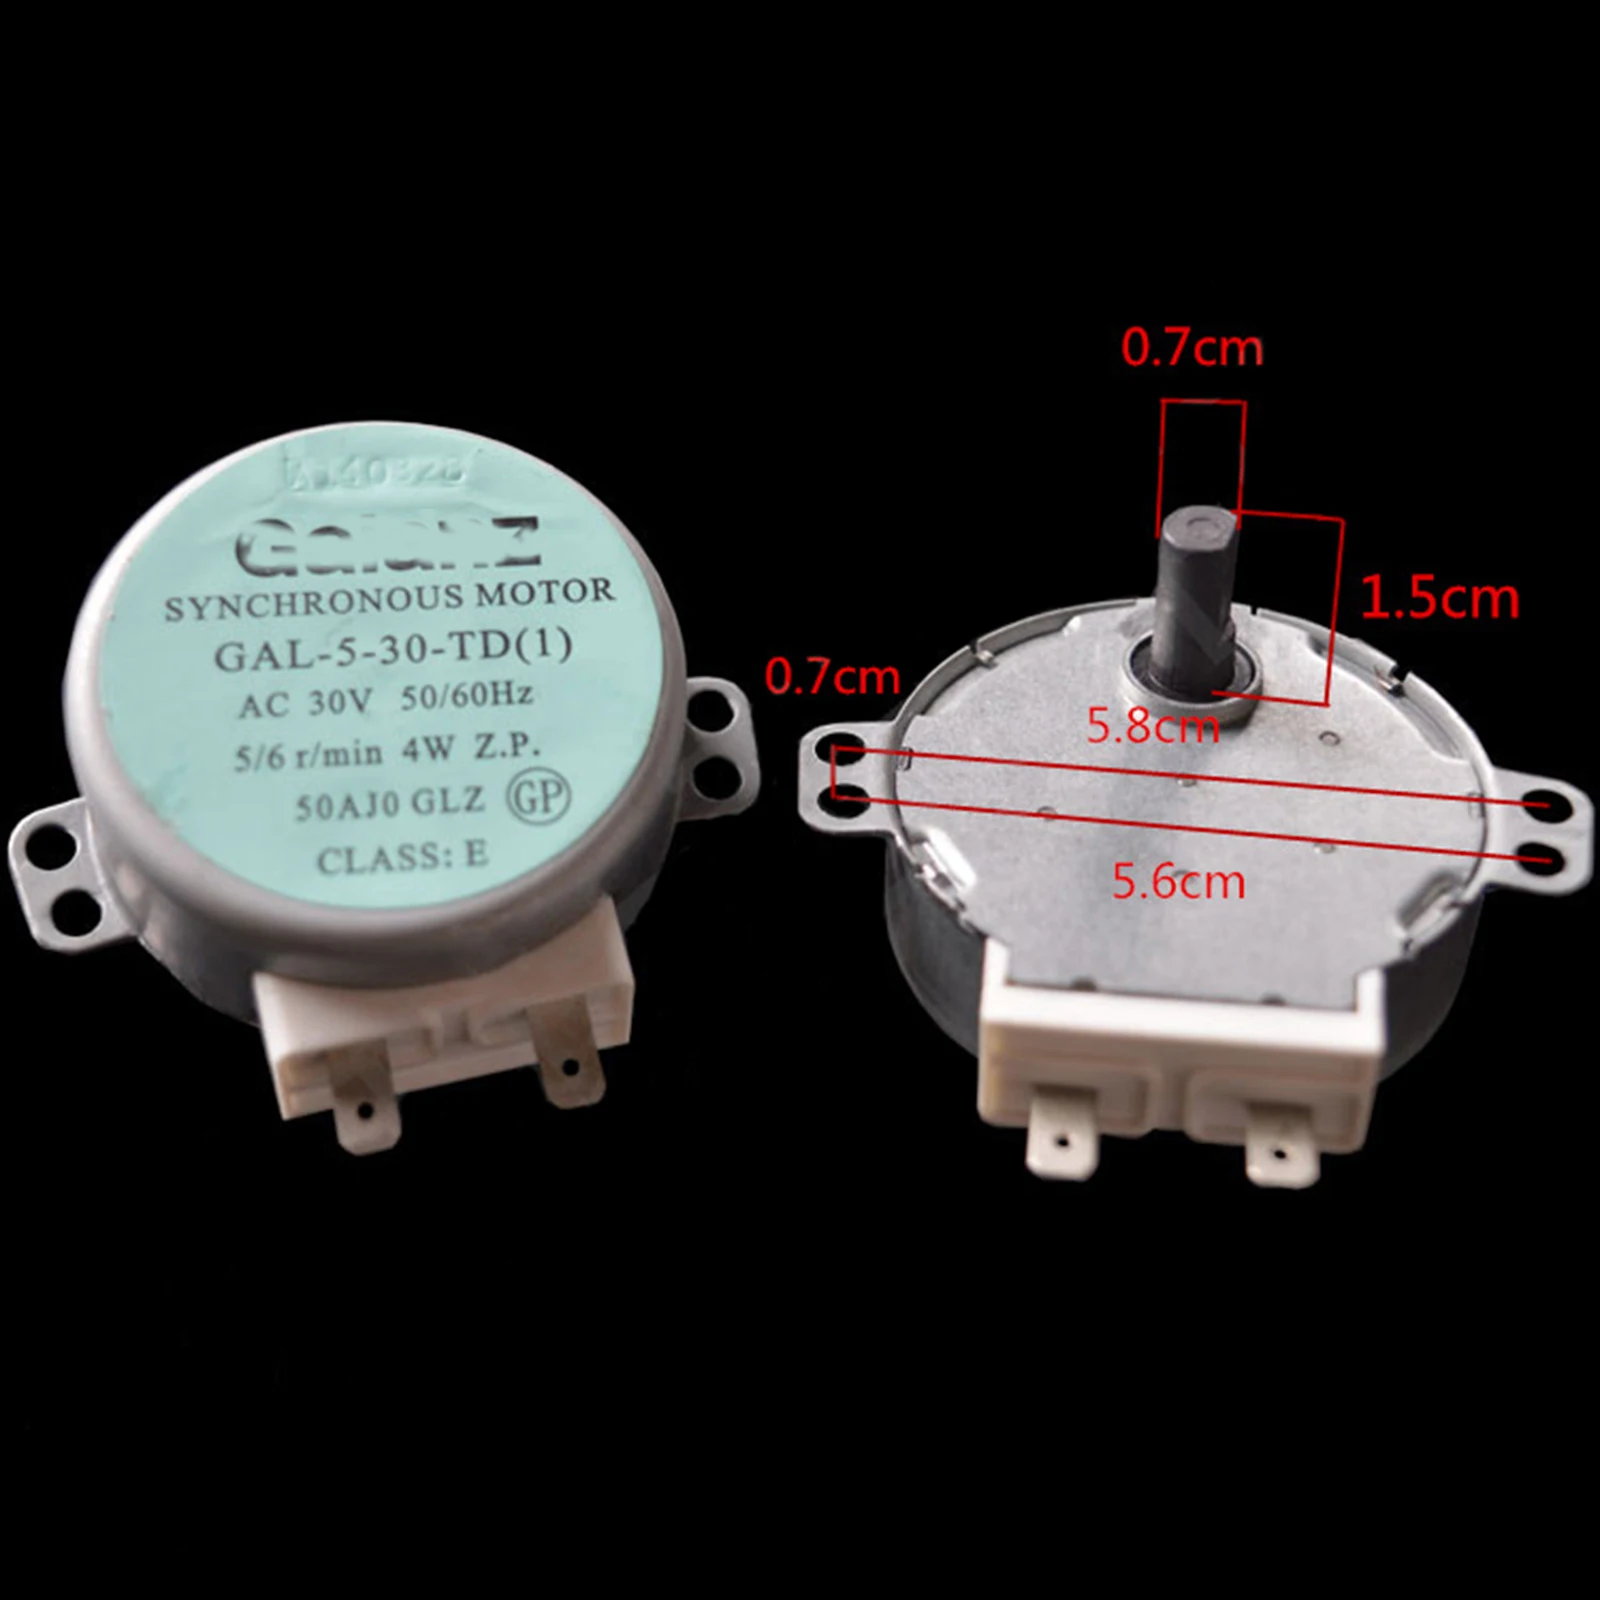 1pcs AC 30V Microwave Oven Synchronous Turntable Motor Tray Motor for GALANZ Microwave Oven GAL-5-30-TD 4W Accessories